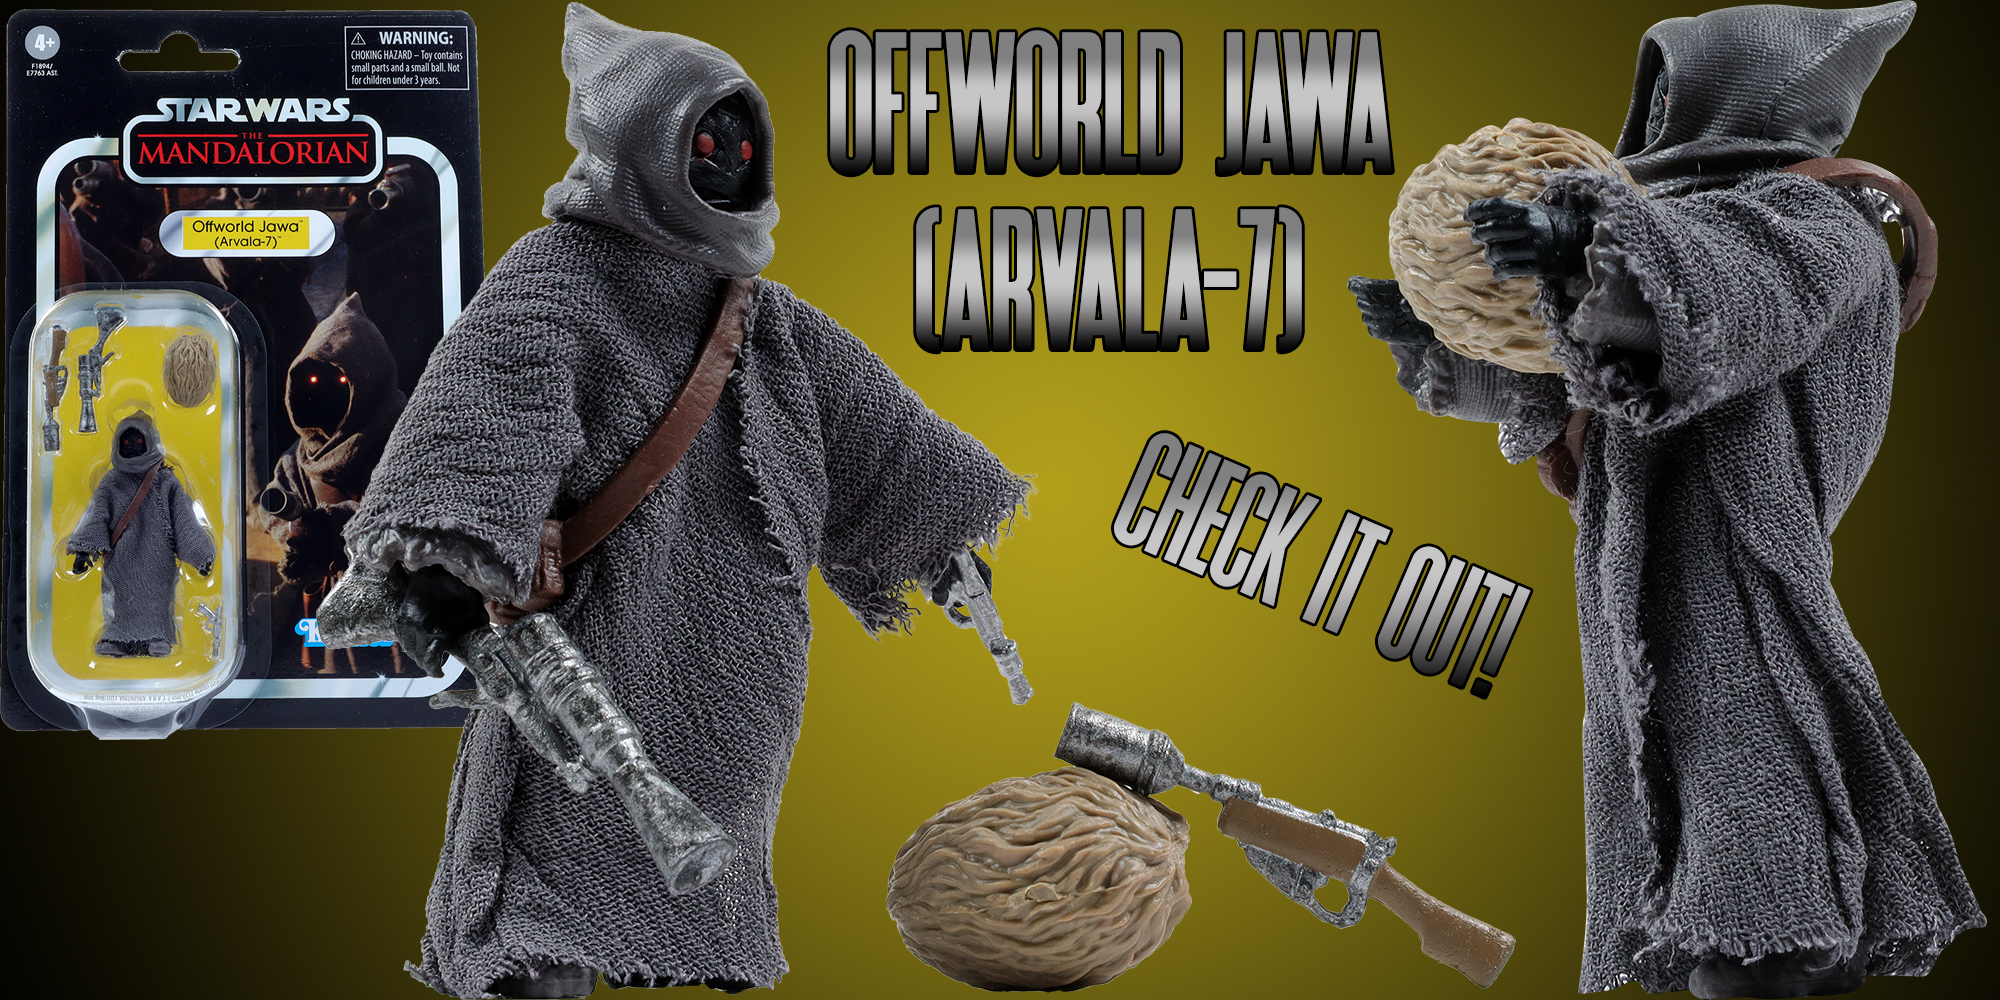 The Offworld Jawa - Now Archived!